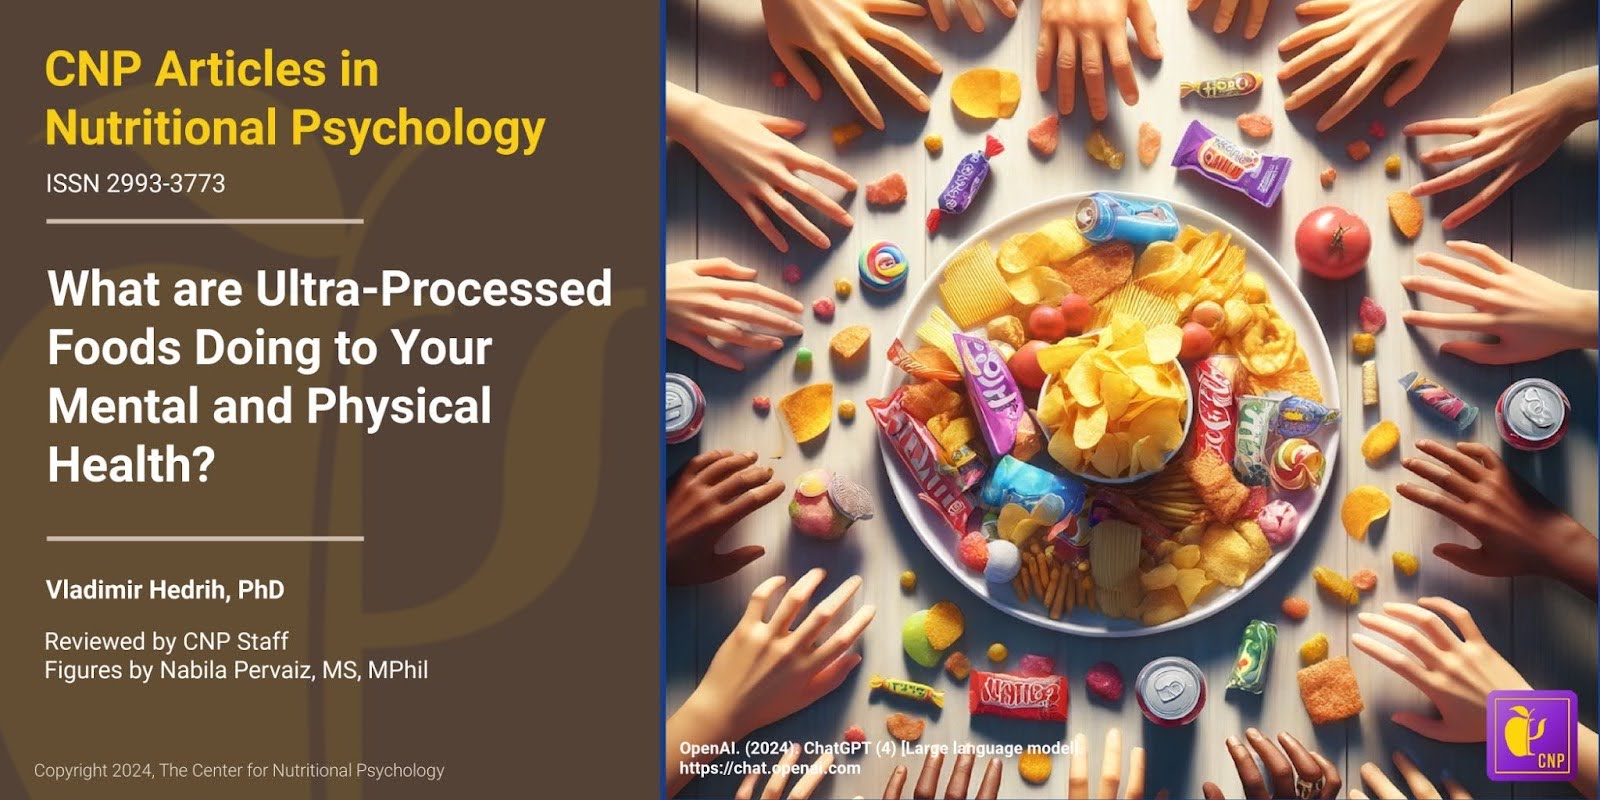 What are Ultra-Processed Foods Doing to Your Mental and Physical Health?